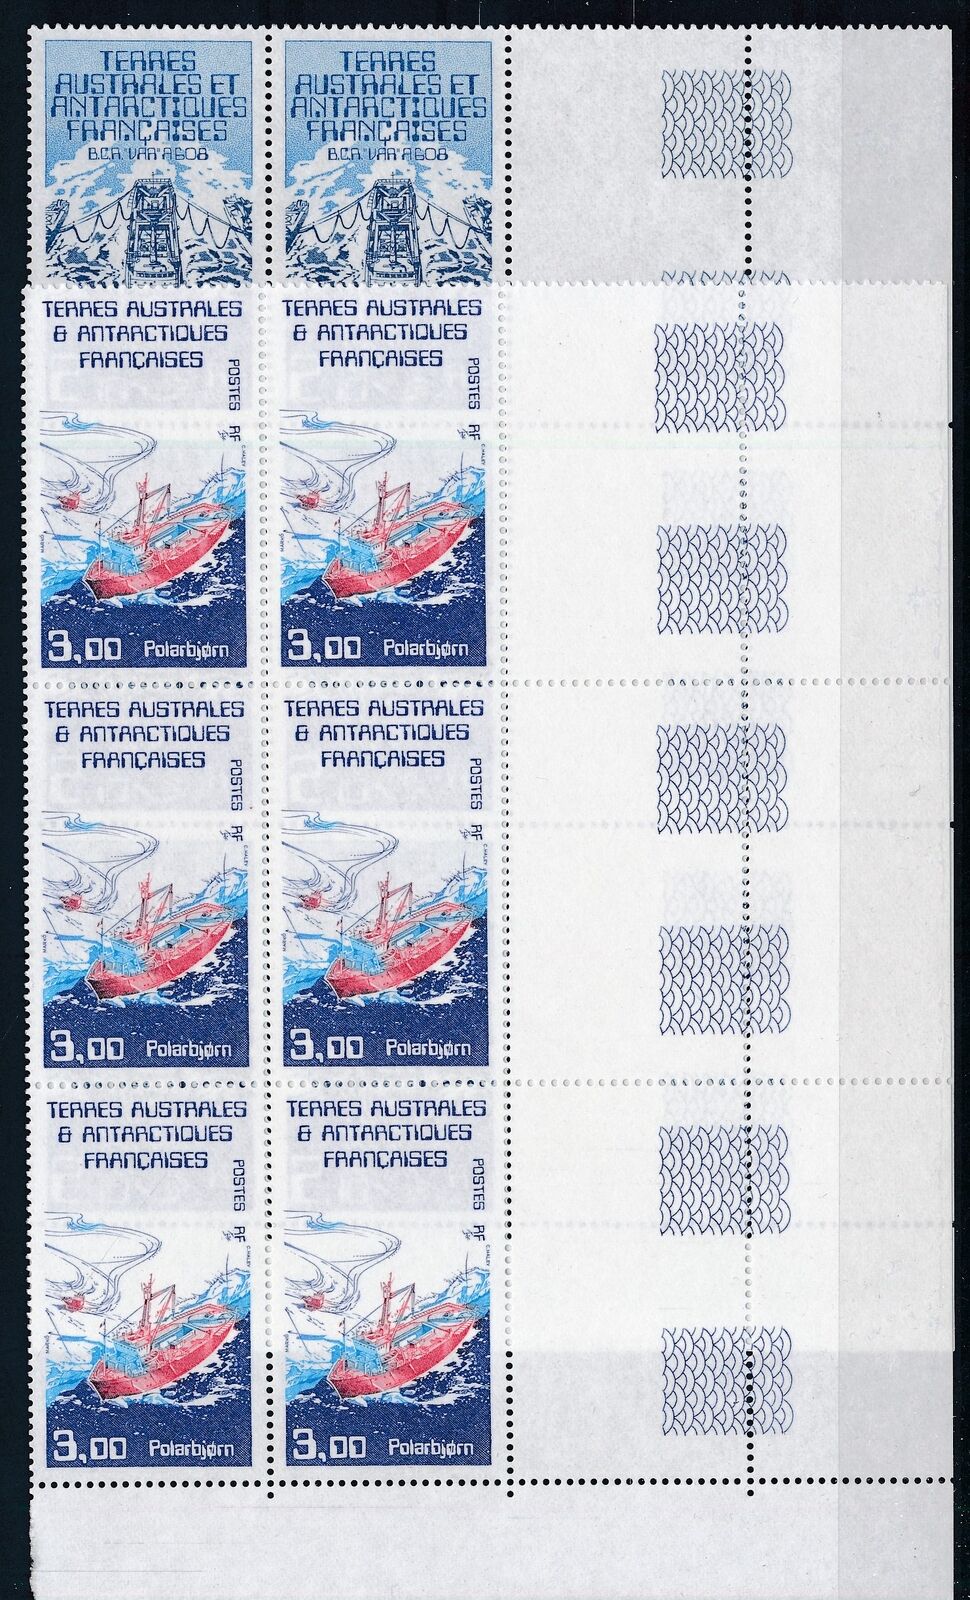 [g96.076] Taaf 1986 Boats Good Set Blocks Of 6 Very Fine Mnh Stamps